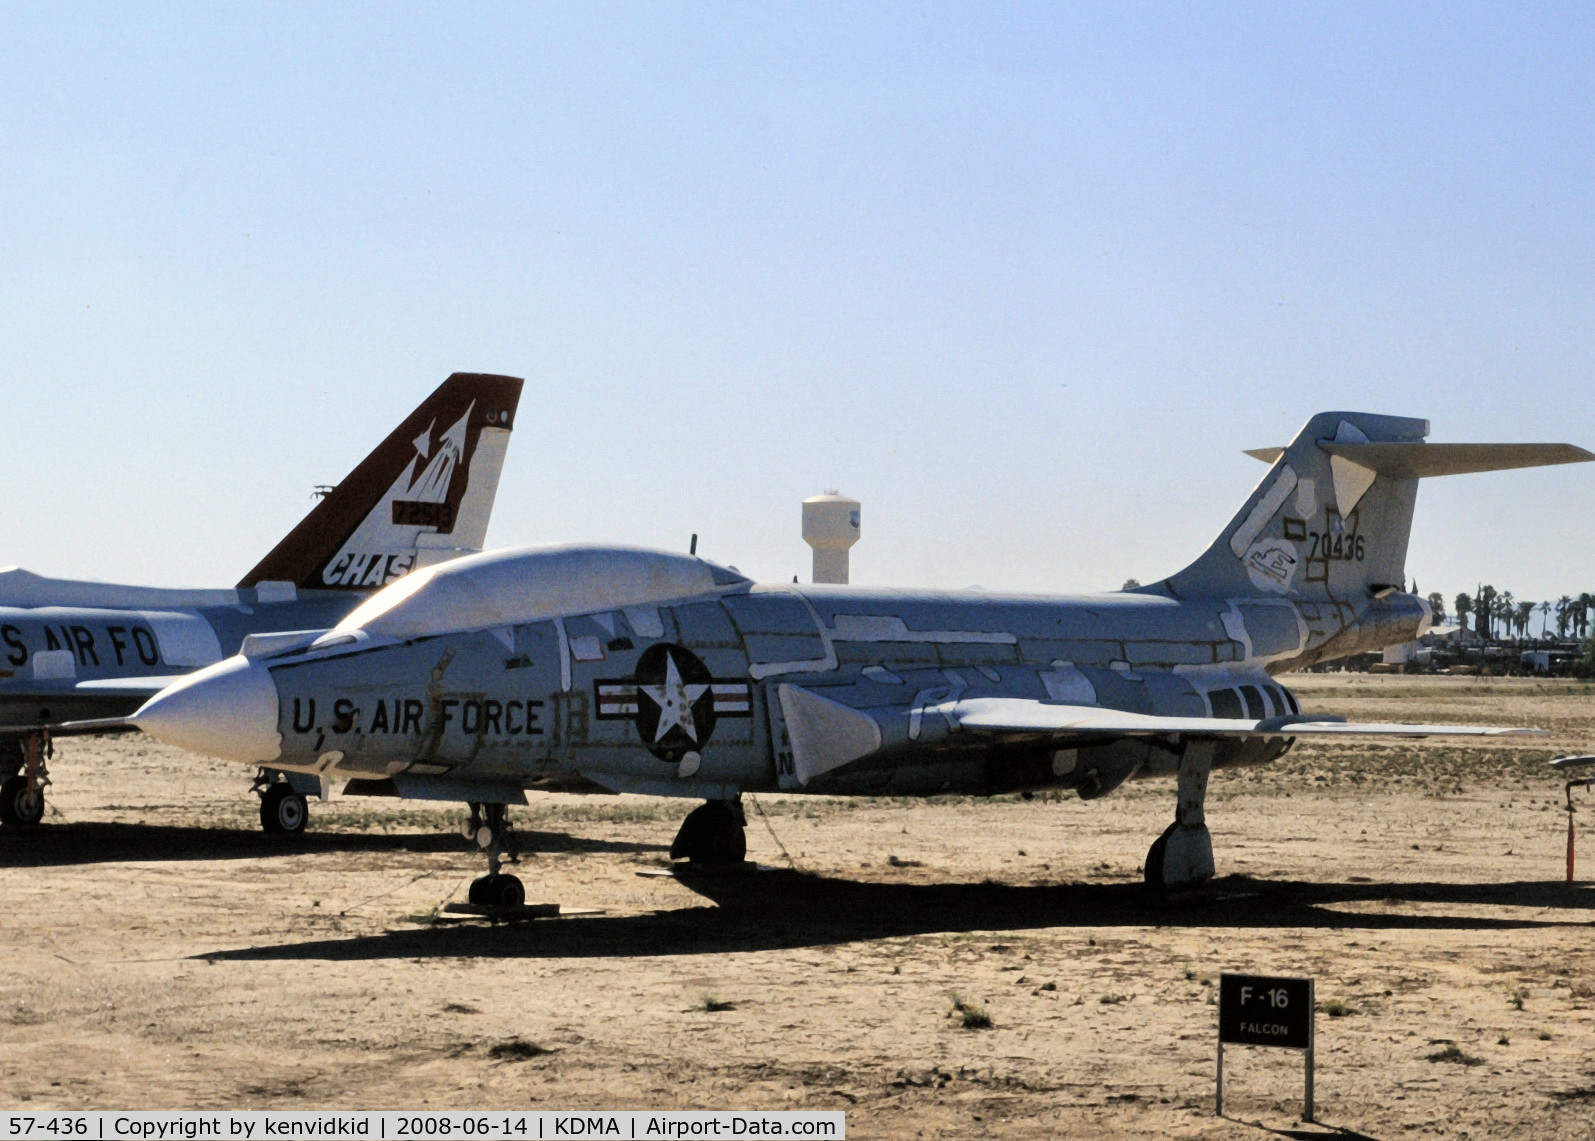 57-436, 1957 McDonnell F-101B Voodoo C/N 614, At Davis Monthan from an air-conditioned bus, circa 1996.